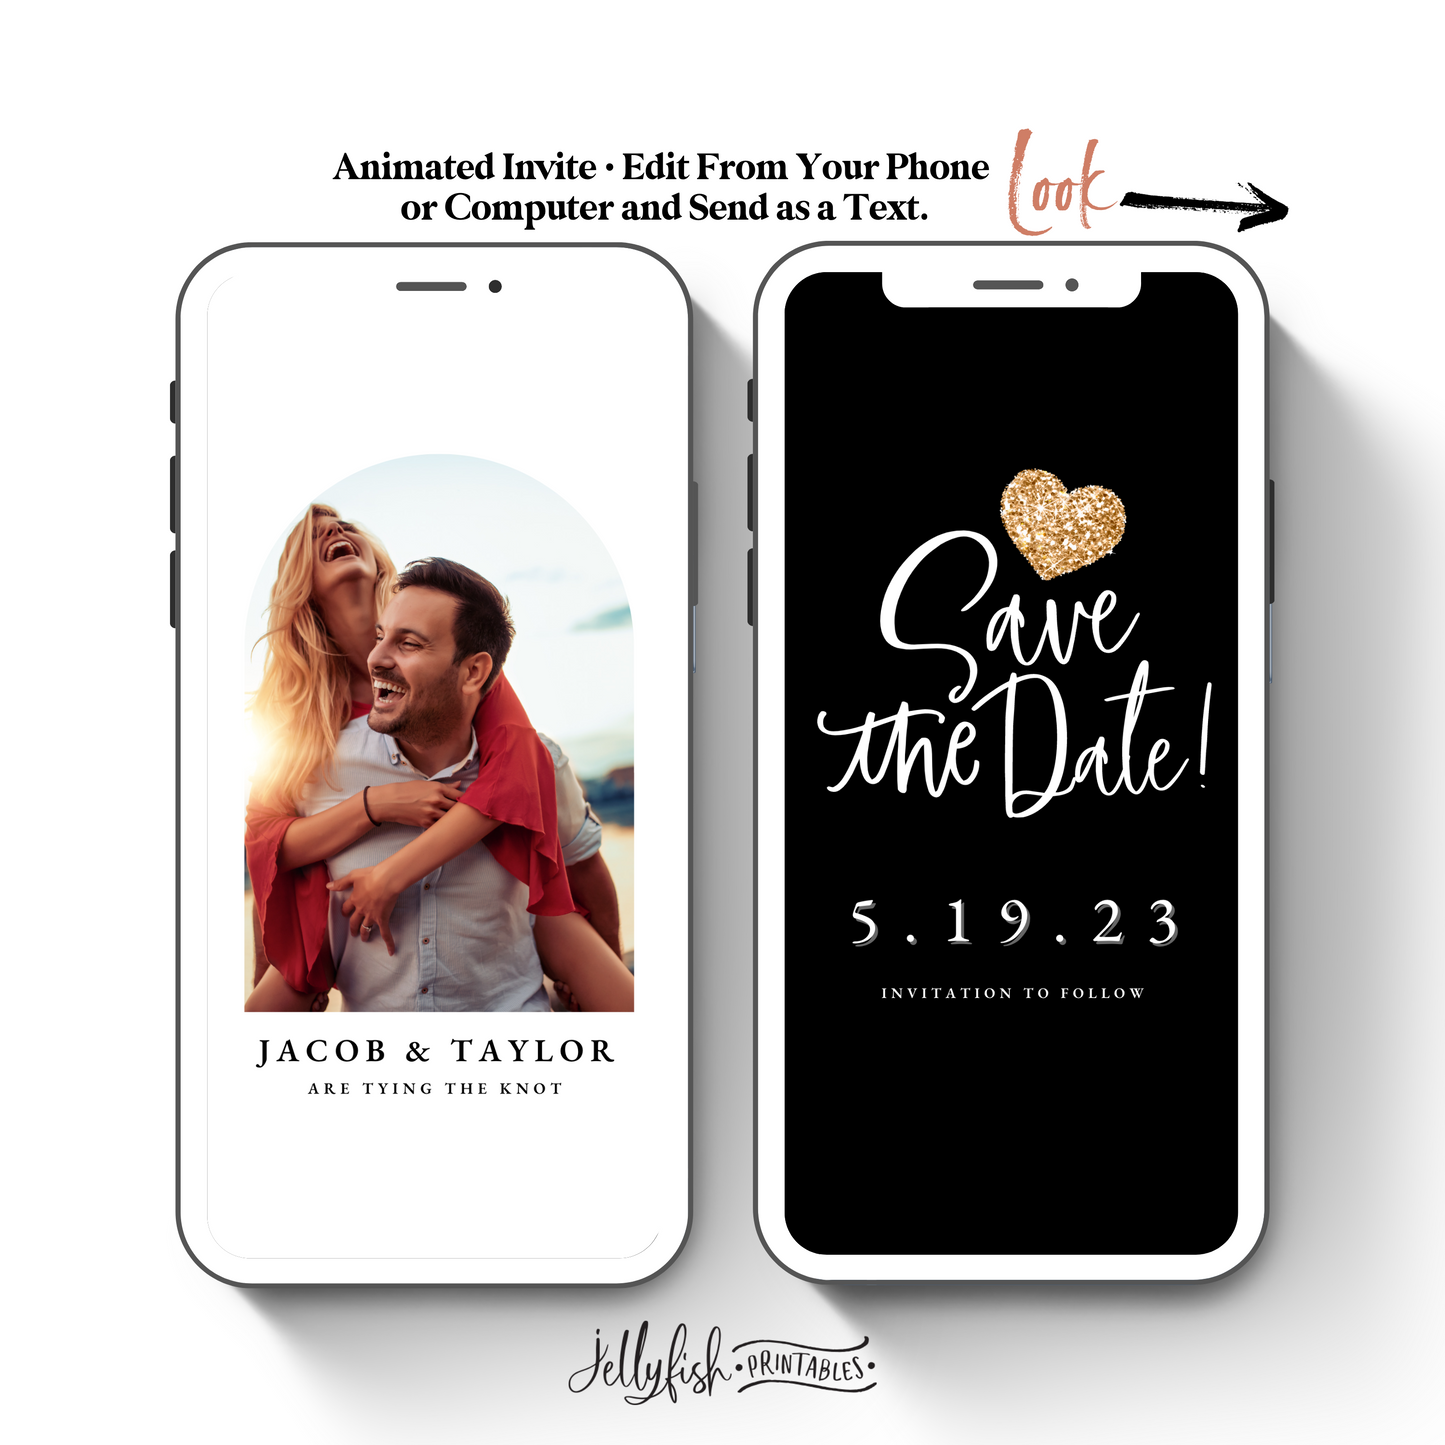 Gold Heart Wedding Save the Date Canva Template. Send Today!